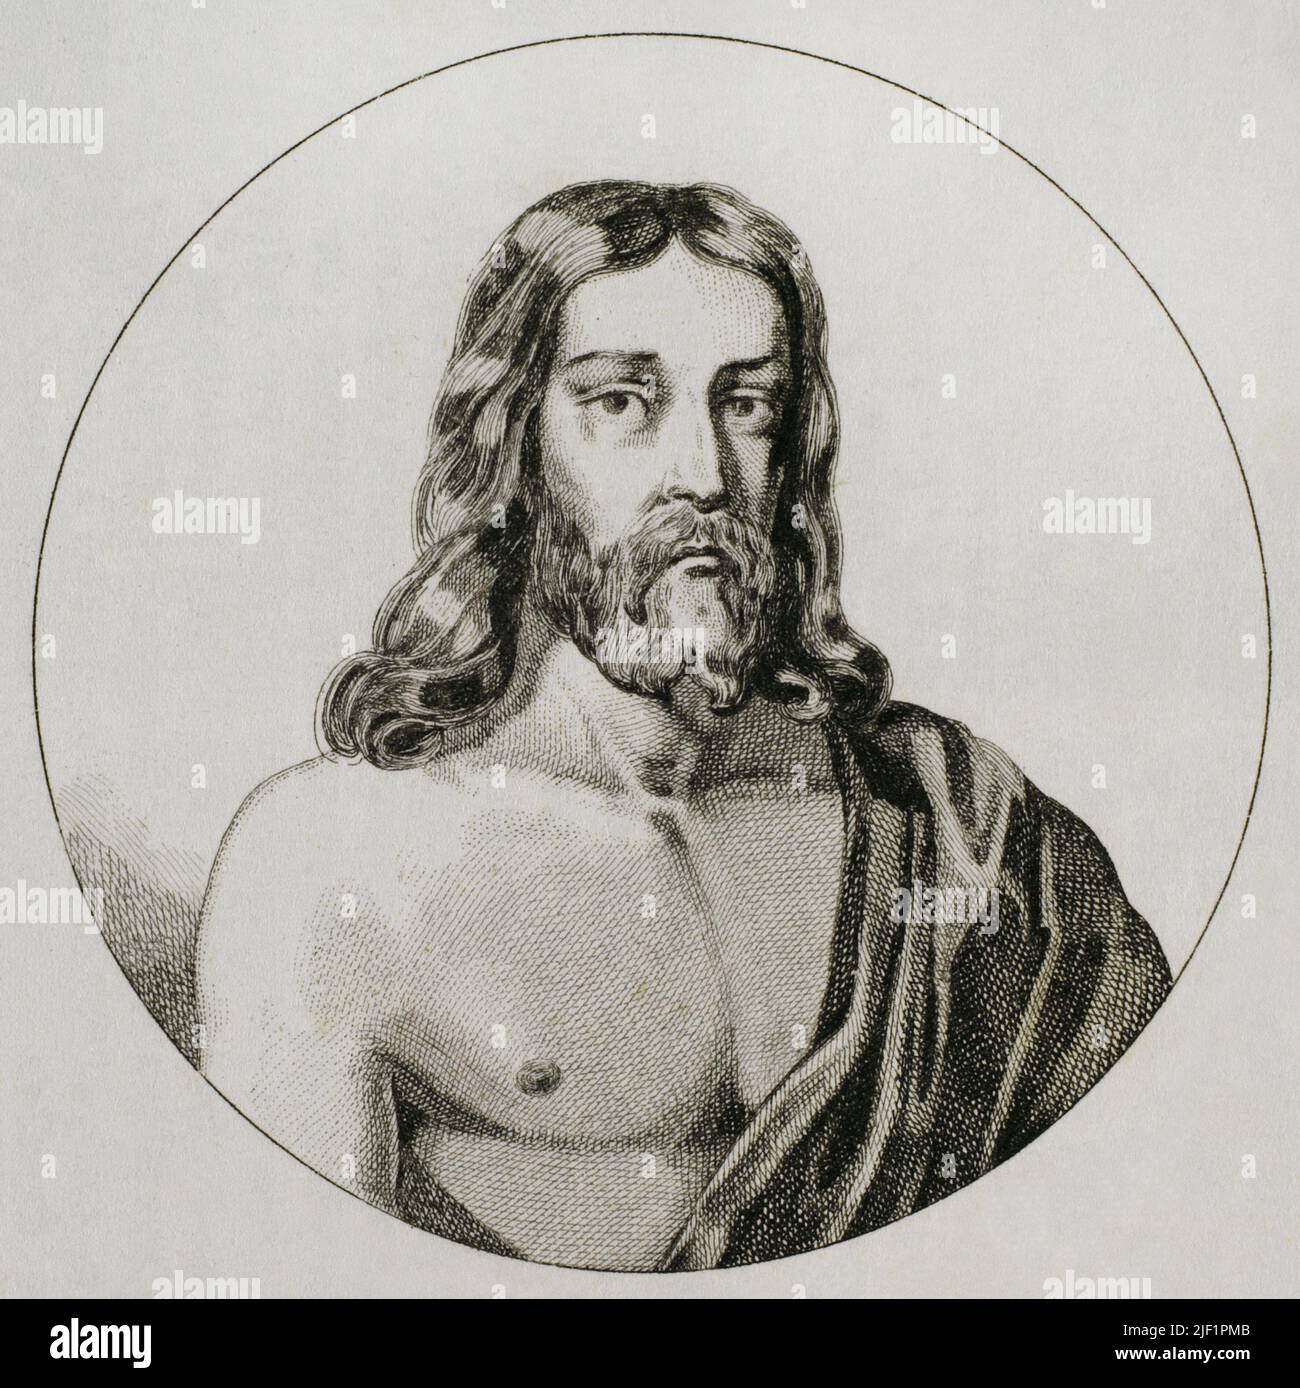 Jesus of Nazareth. Portrait of Jesus Christ delivered to the King Abgar V of Edessa. Engraving drawn by Vernier. Engraved by Lesueur. 'Panorama Universal. Historia de Armenia', 1838. Stock Photo